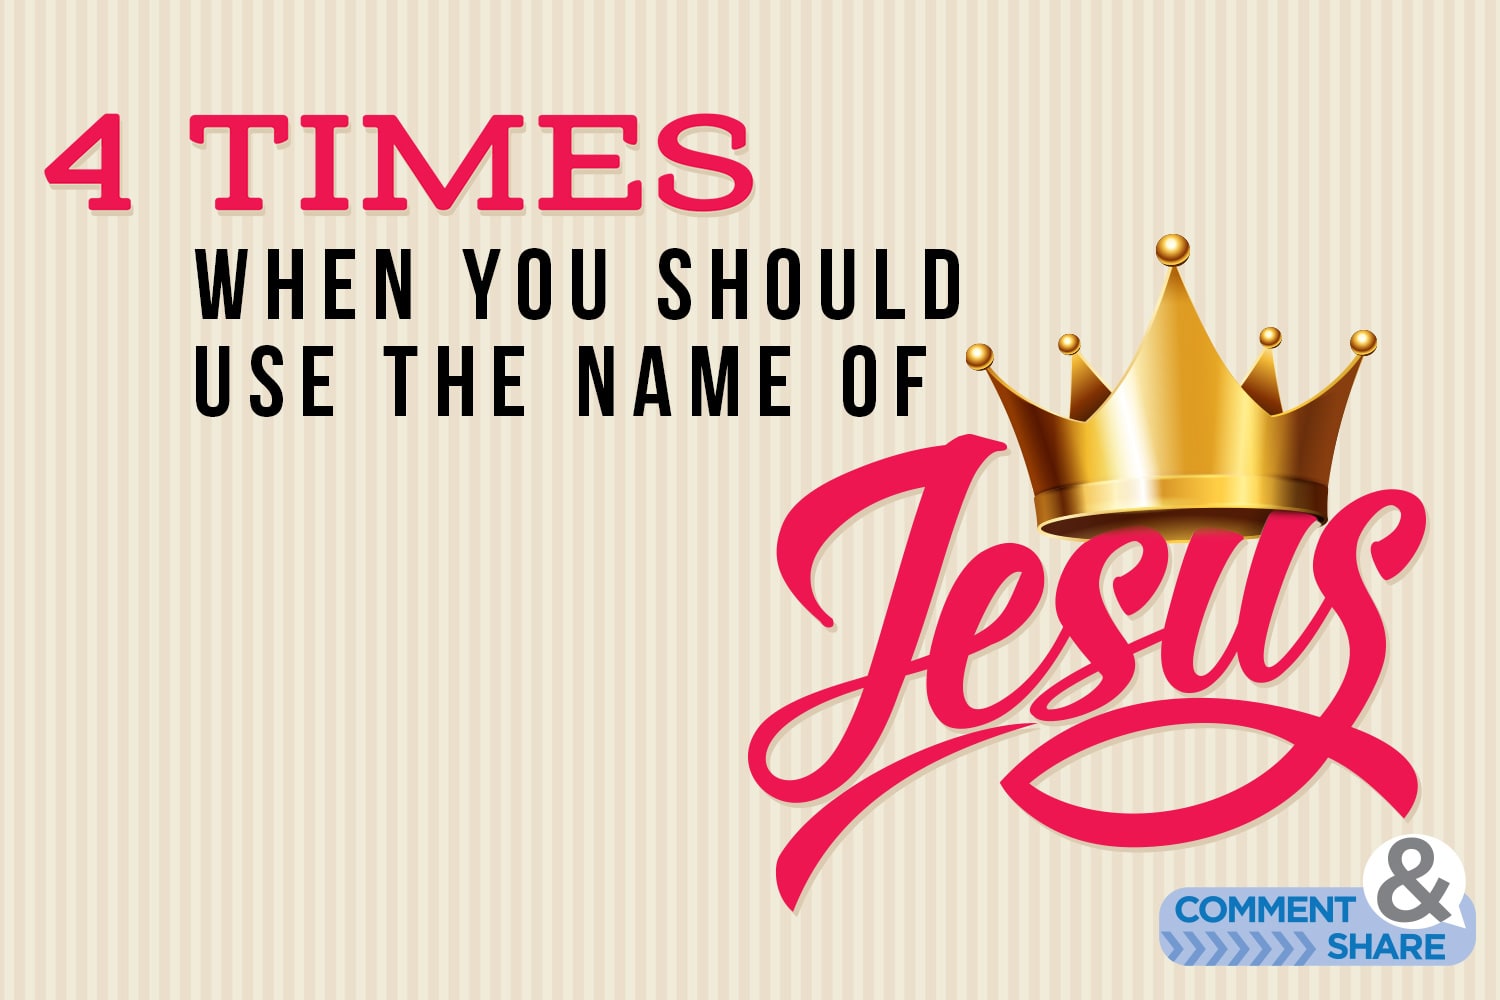 4 Times You Should Use the Name of Jesus